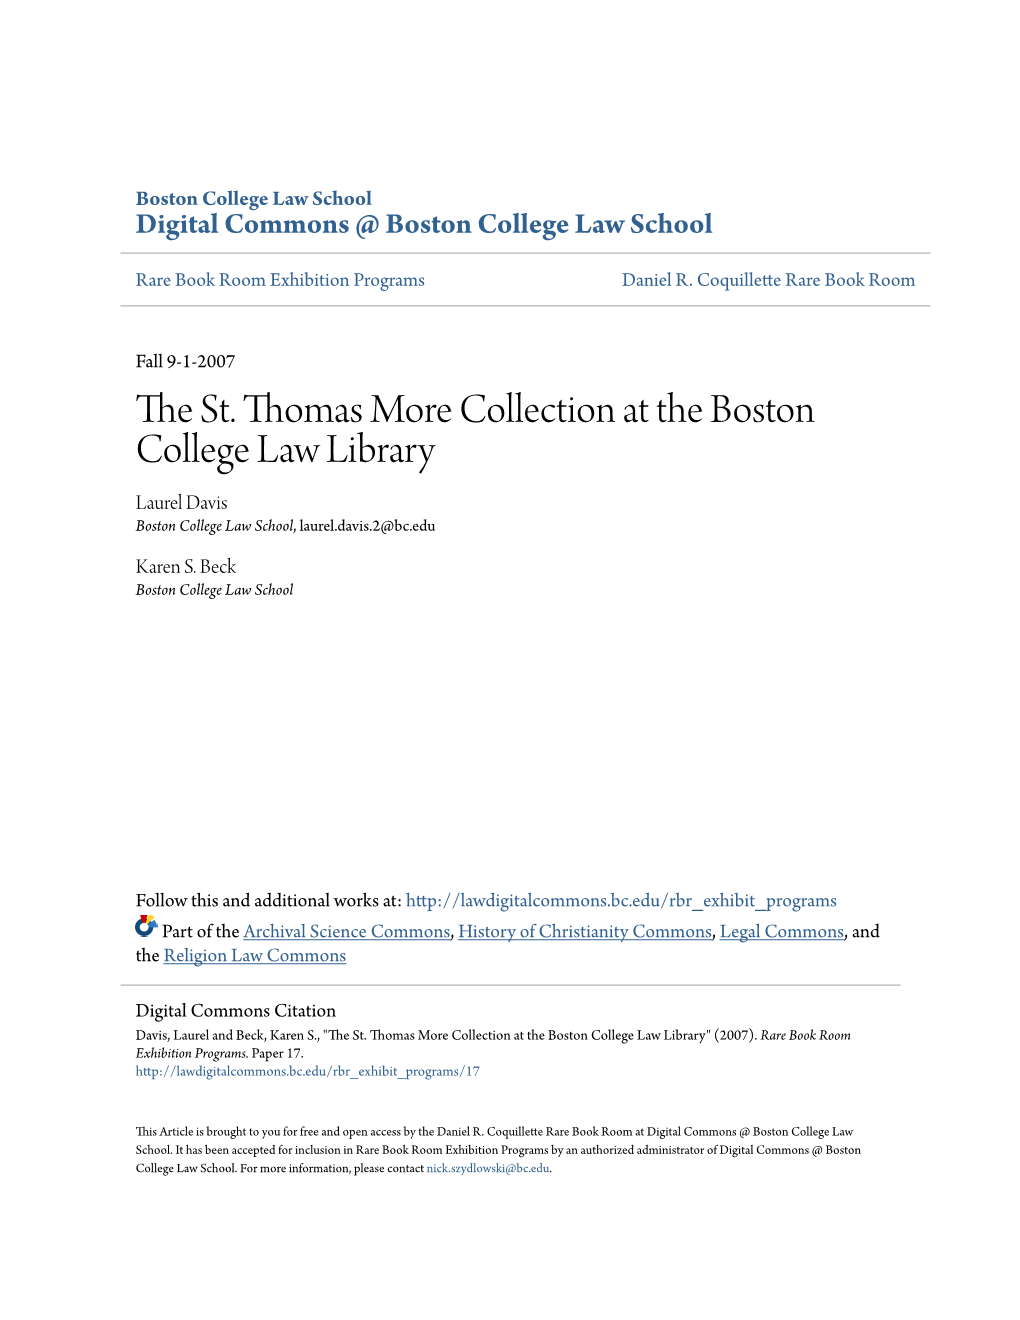 The St. Thomas More Collection at the Boston College Law Library